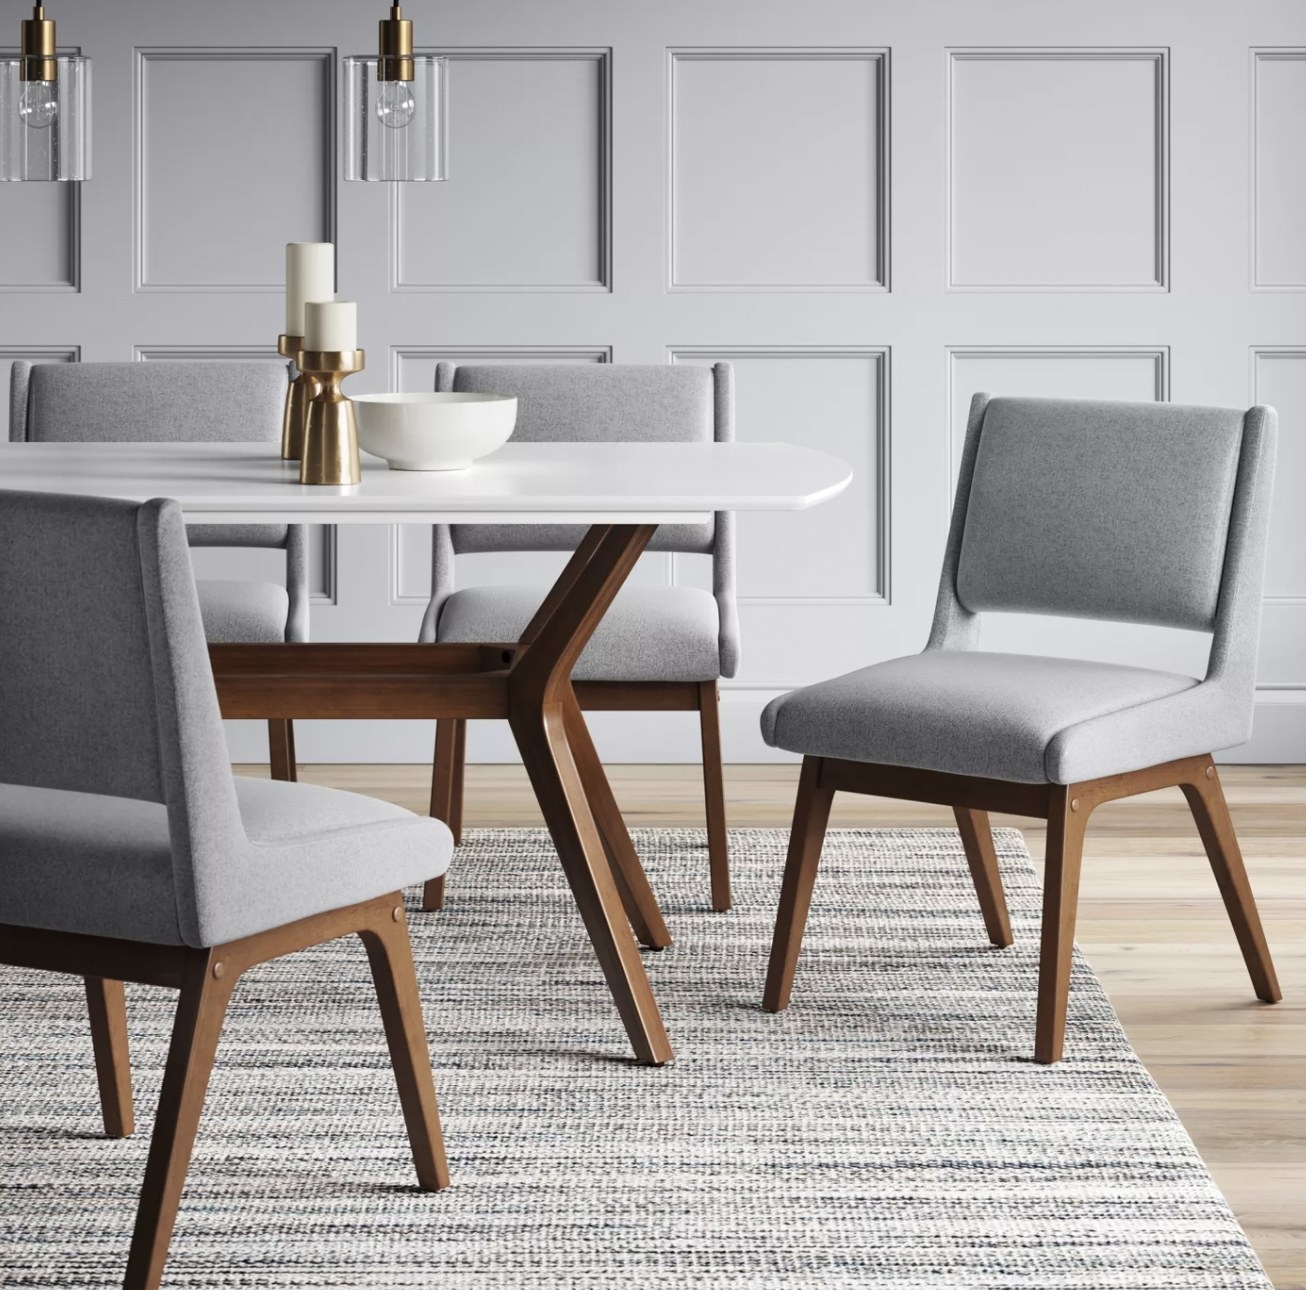 a grey upholstered dining chair with a backrest and tan wooden legs